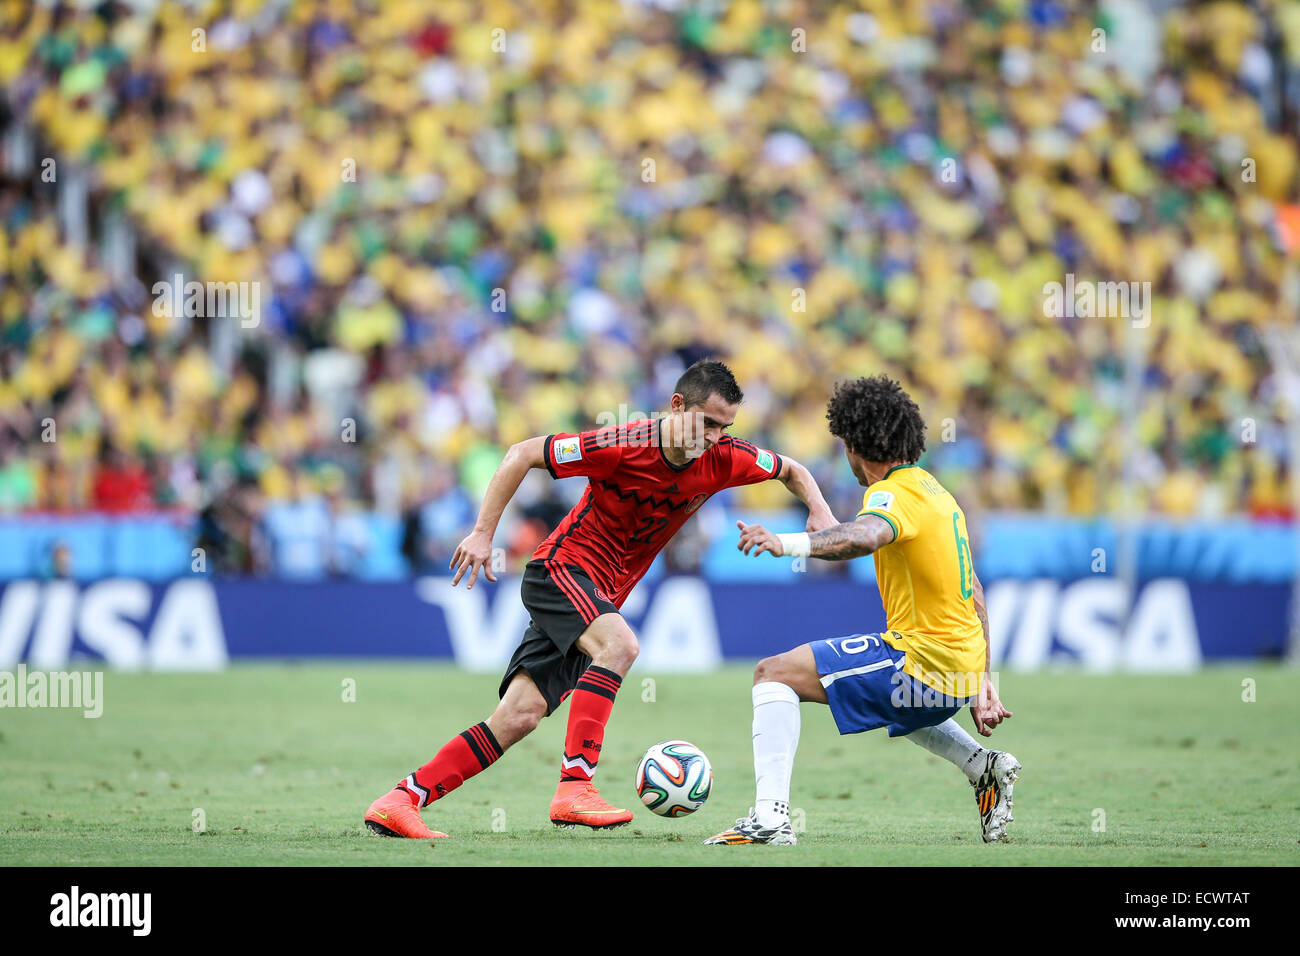 2014 FIFA World Cup - Brazil v Mexico - held at Castelao Stadium. The game ended in a 0-0 draw.  Featuring: Paul Aguilar,Marcelo Where: Fortaleza, CE, Brazil When: 17 Jun 2014 Stock Photo